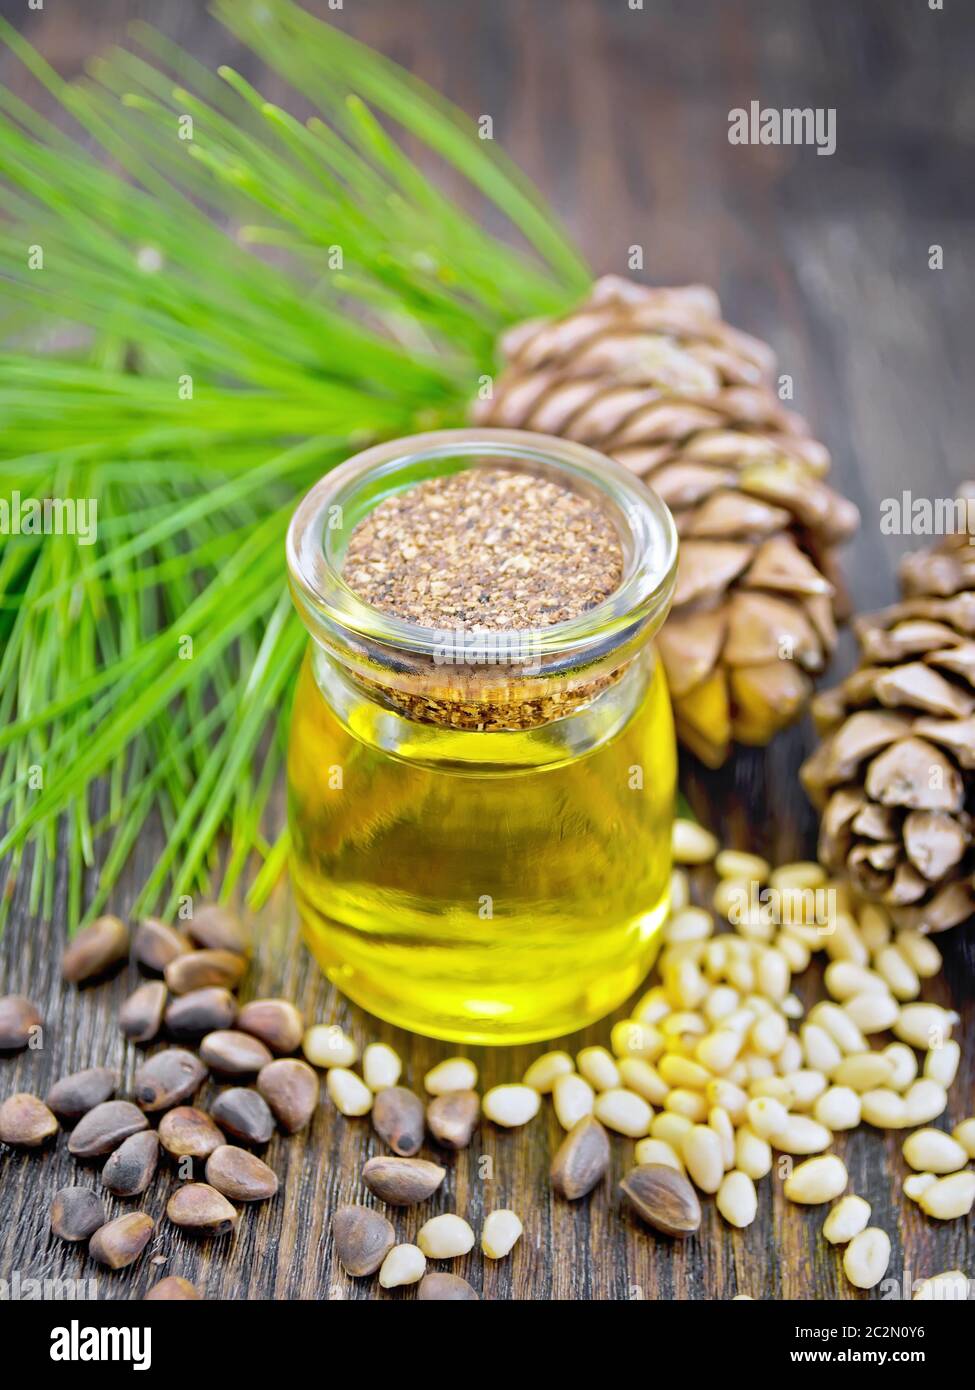 Cedar oil in a jar, two cedar cones, nuts and green twigs on a wooden board background Stock Photo